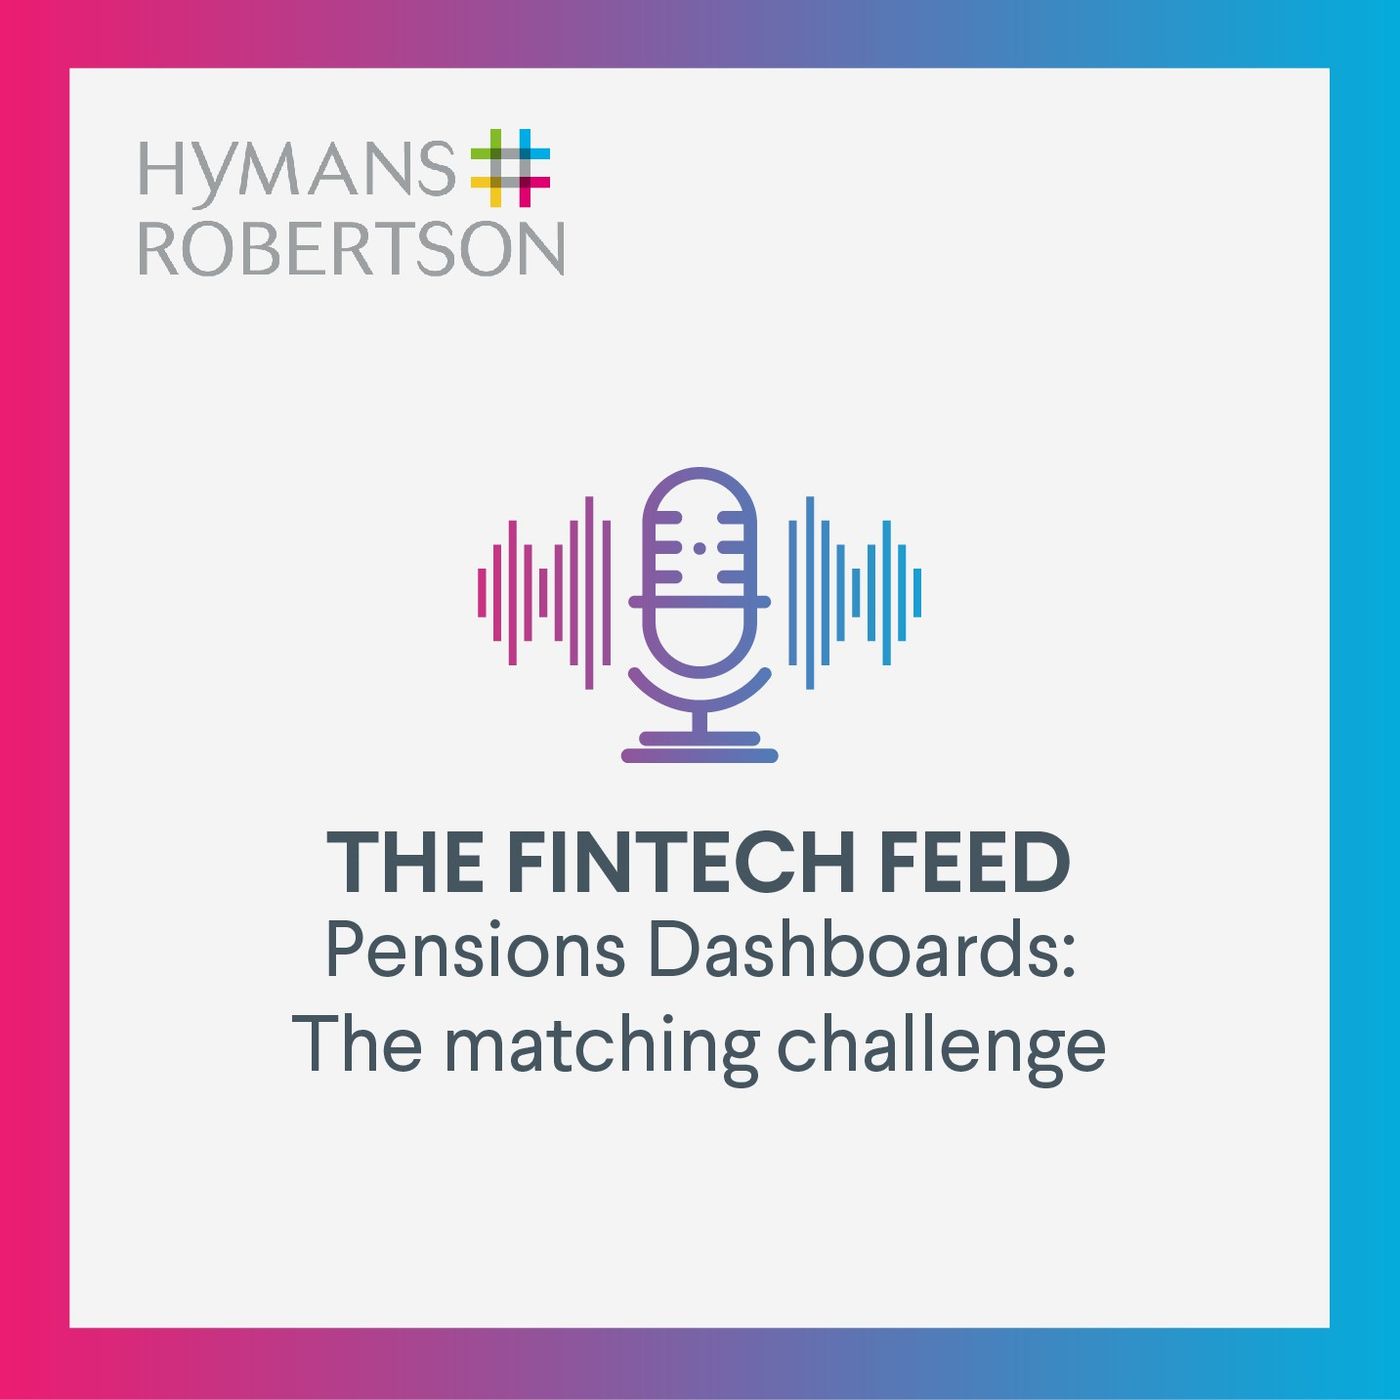 Pensions Dashboards: The matching challenge - Episode 9